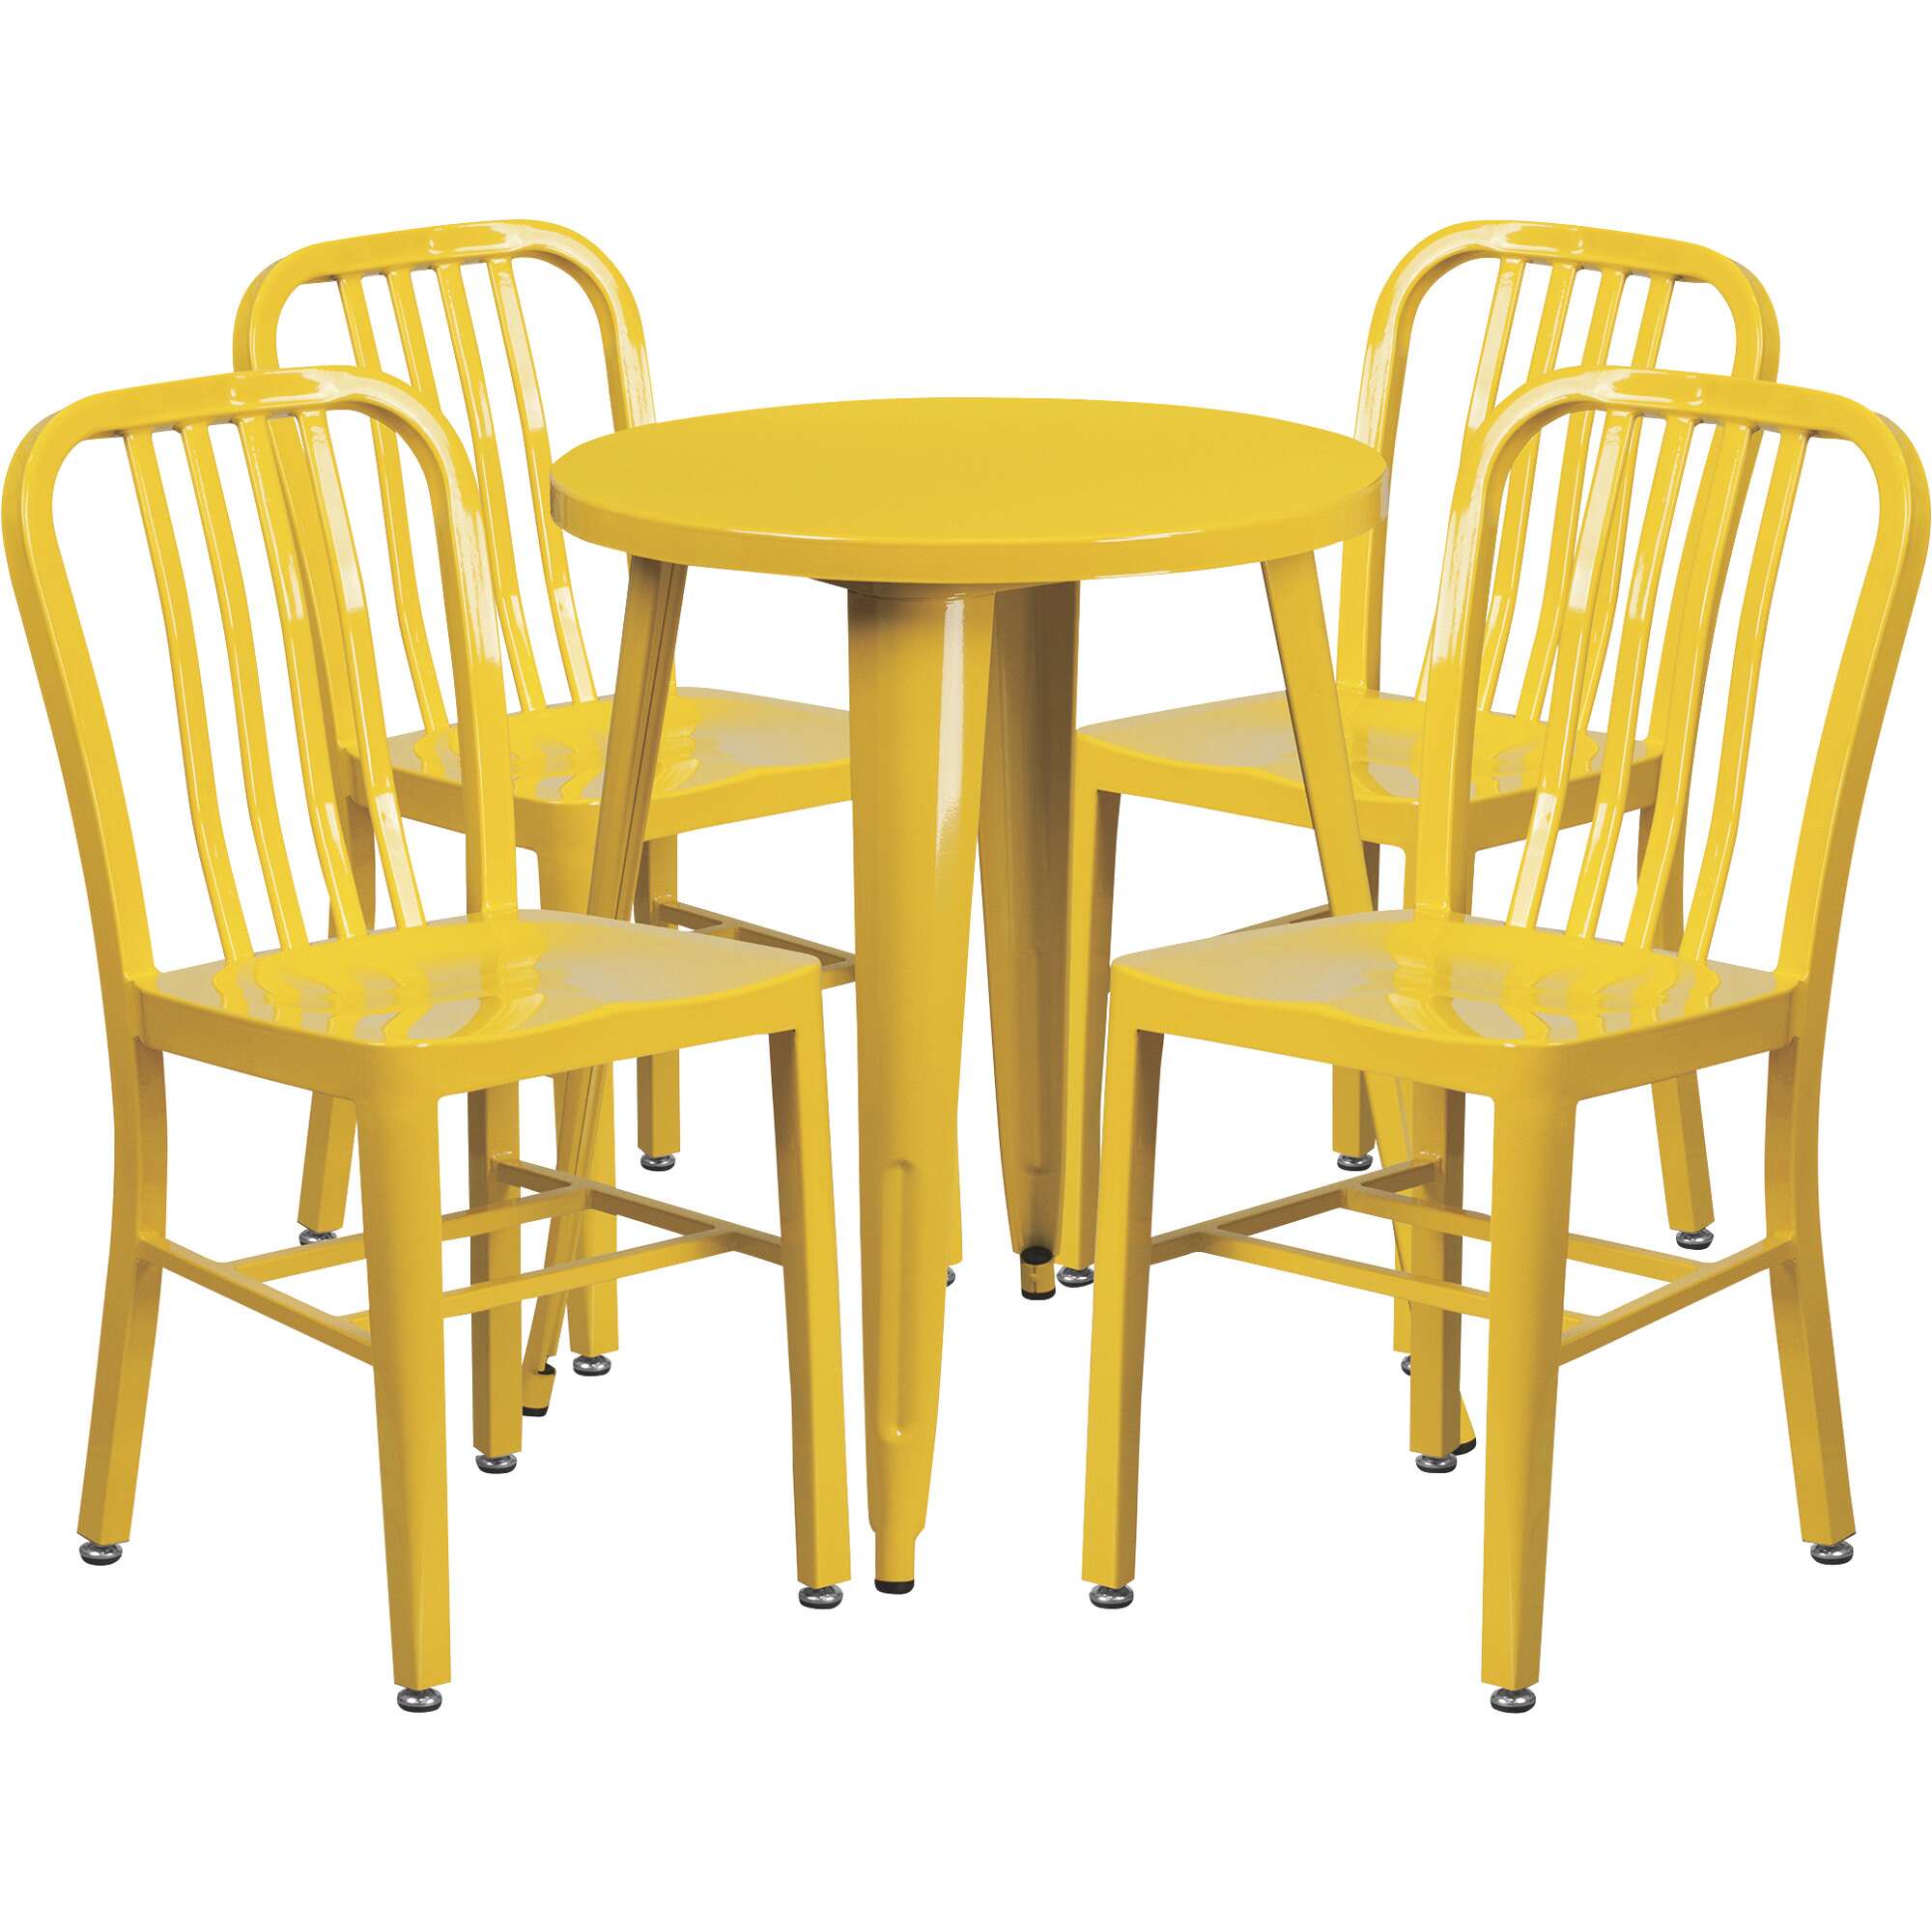 Flash Furniture 5Pc Metal Dining Set 24in Round x 29in H Table with 4 Industrial Style Chairs